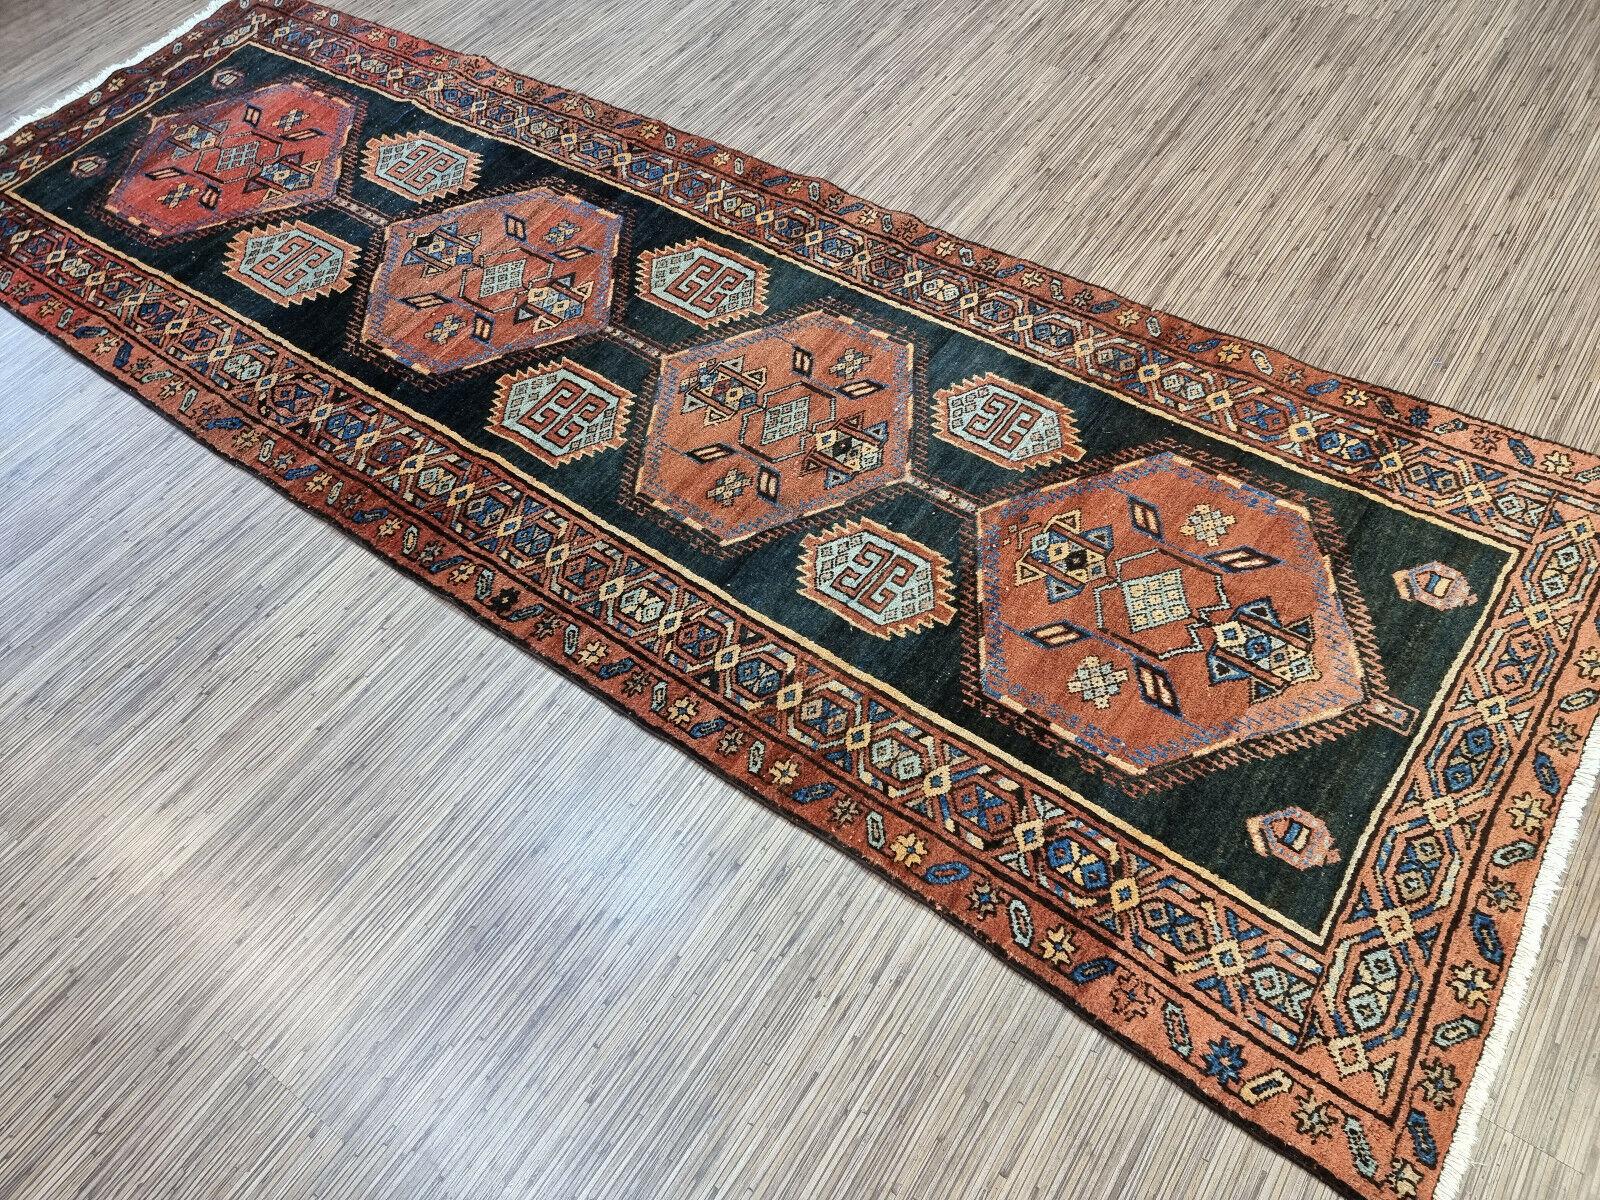 Enhance your home decor with our Handmade Antique Persian Style Hamadan Rug. This gorgeous rug was woven in the 1920s by skilled artisans from the Hamadan region. The rug measures 3.2’ x 9.1’, making it suitable for any room.

The rug is made from